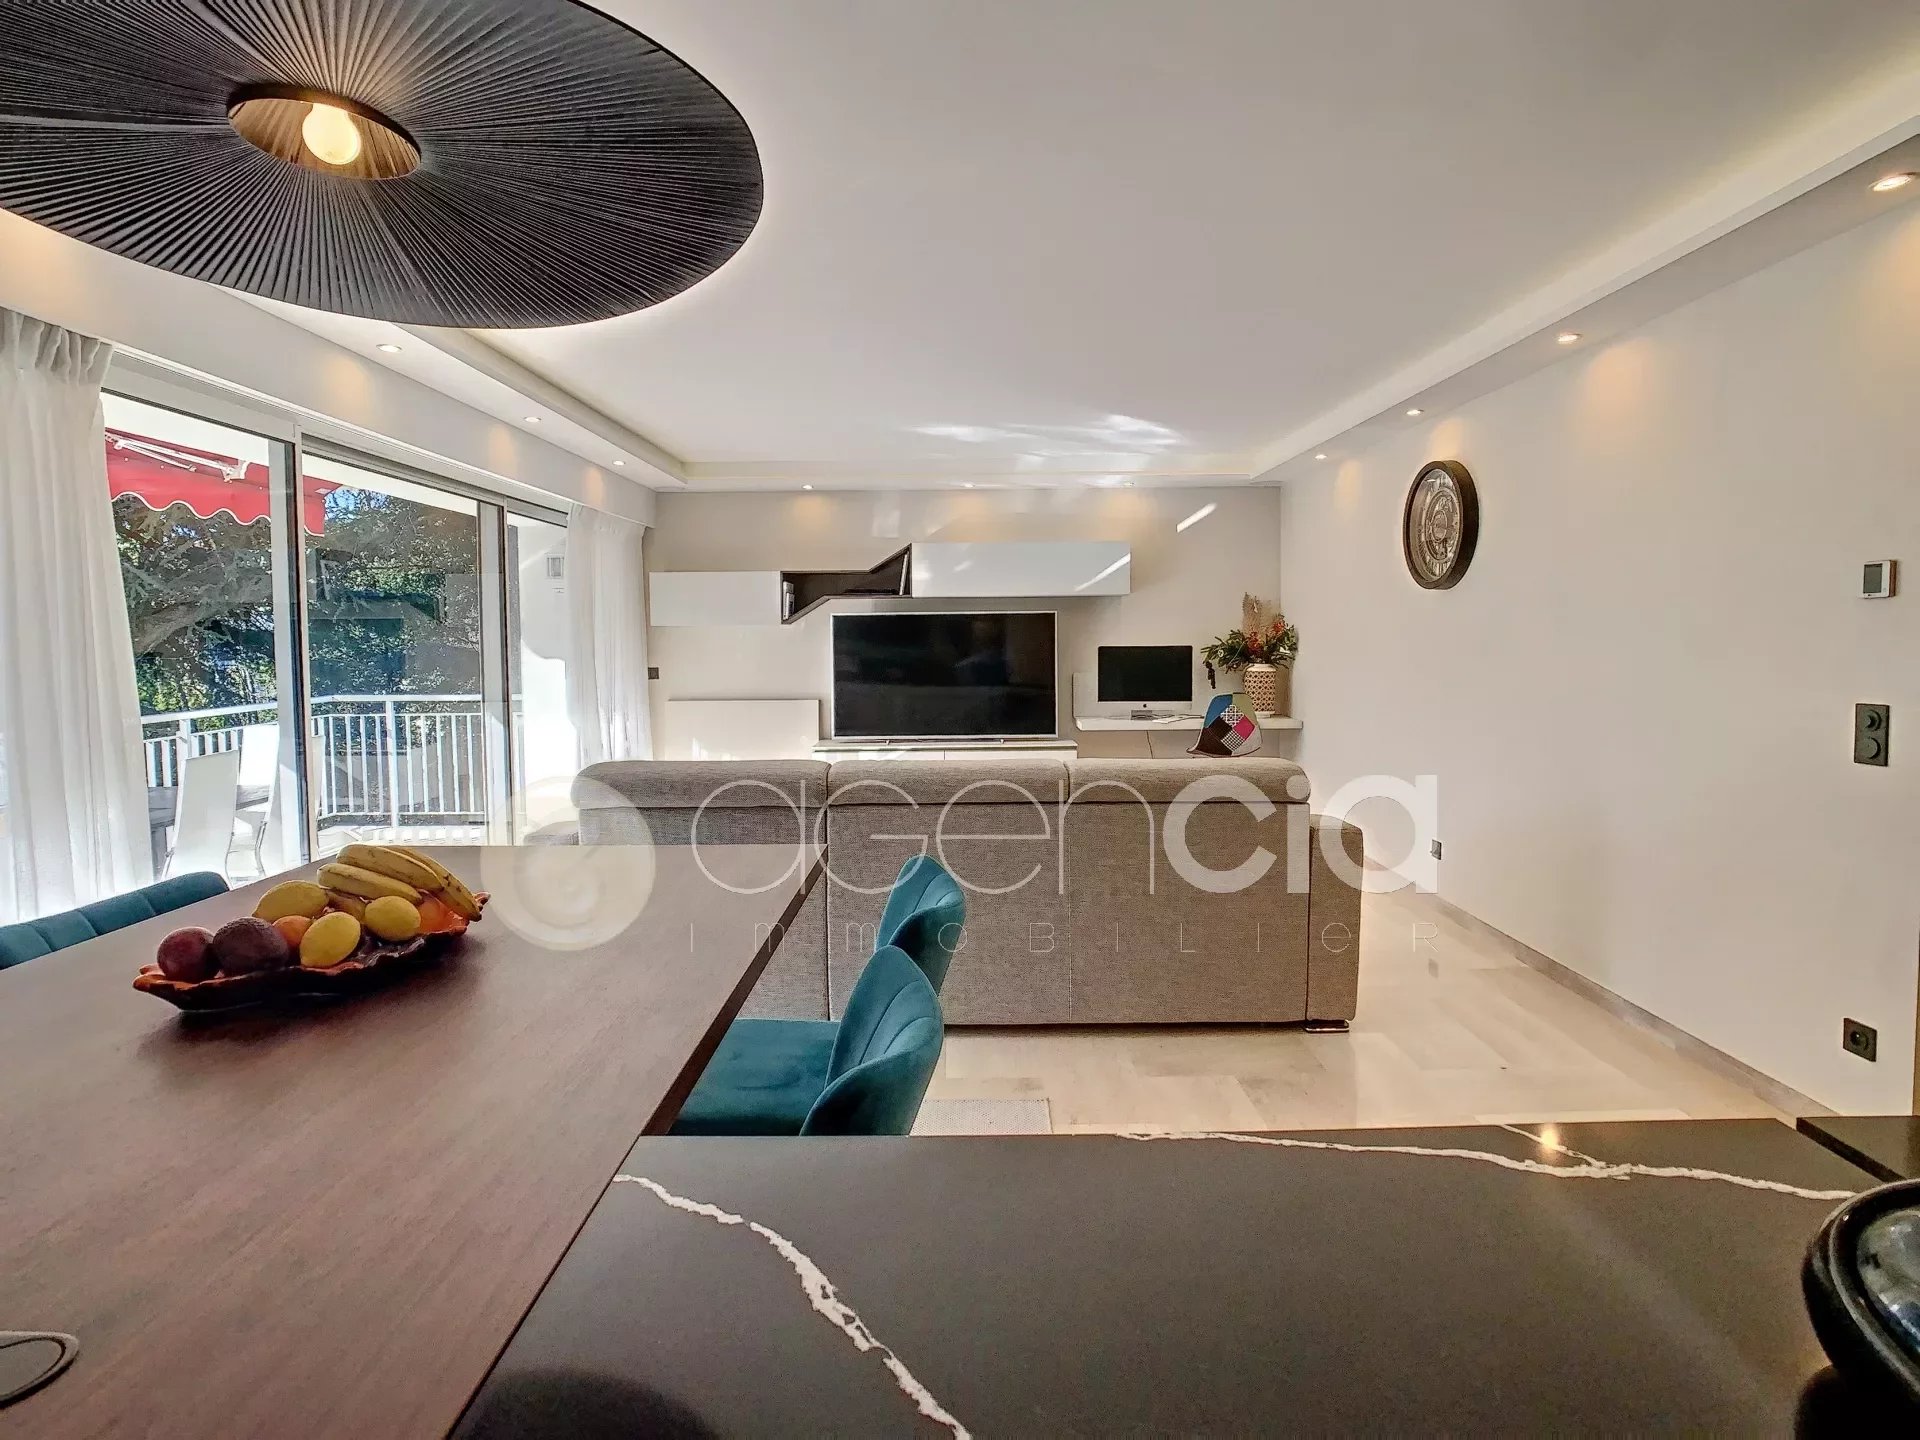 CANNES / 3-BEDROOM APARTMENT 110 M2 IN ABSOLUTE CALM - LUXURY RESIDENCE